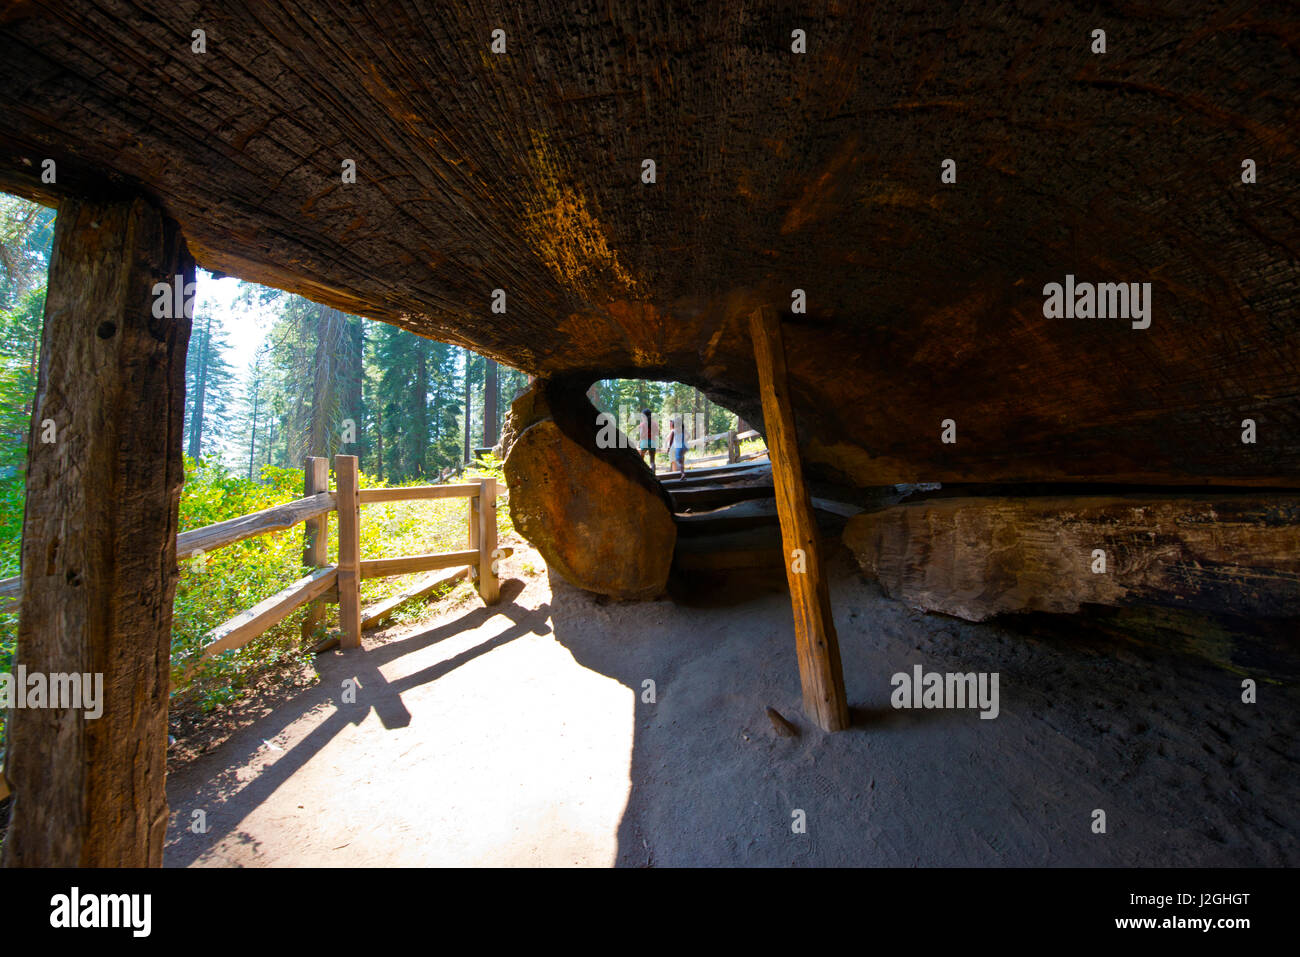 USA, California, Sequoia, Kings Canyon National Park, Grant Grove of Giant Sequoia, Tourists Standing in tunnel through fallen tree (Large format sizes available) Stock Photo